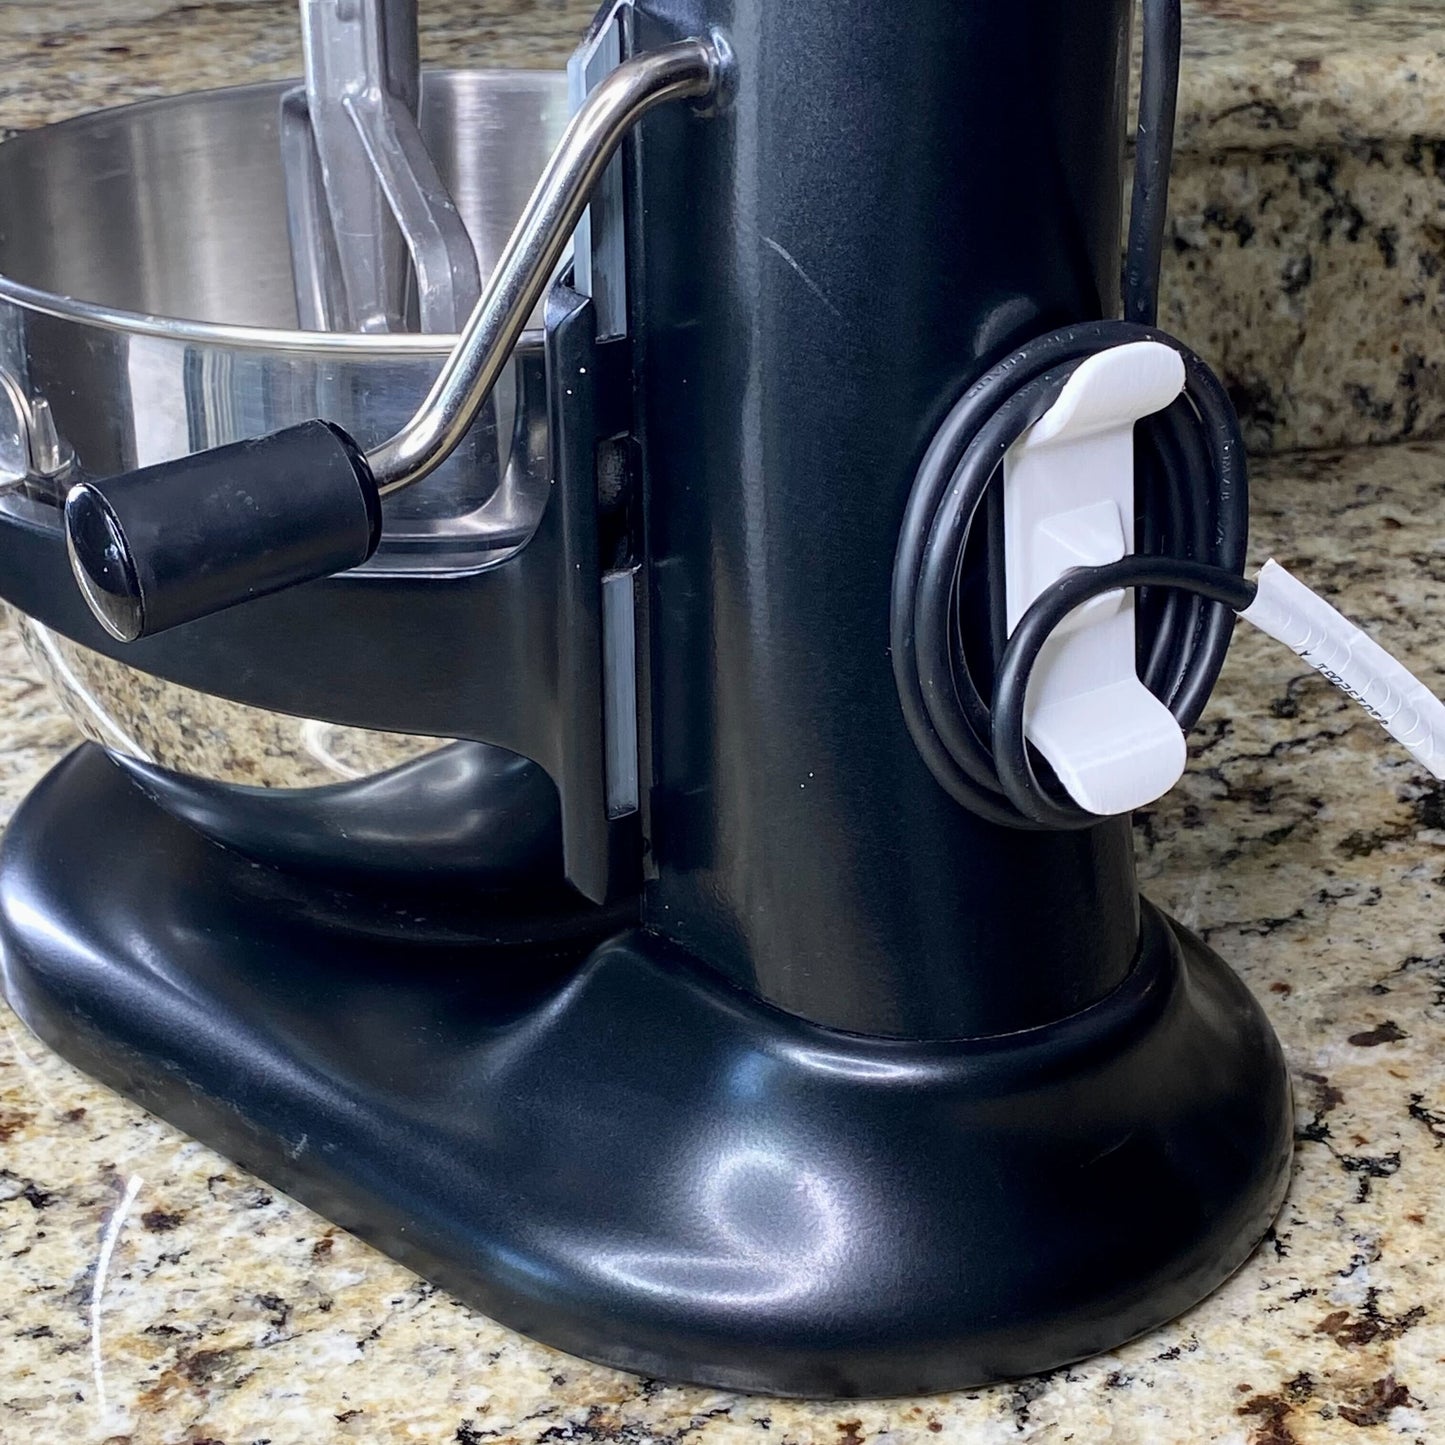 Cable Wrap for KitchenAid Stand Mixer